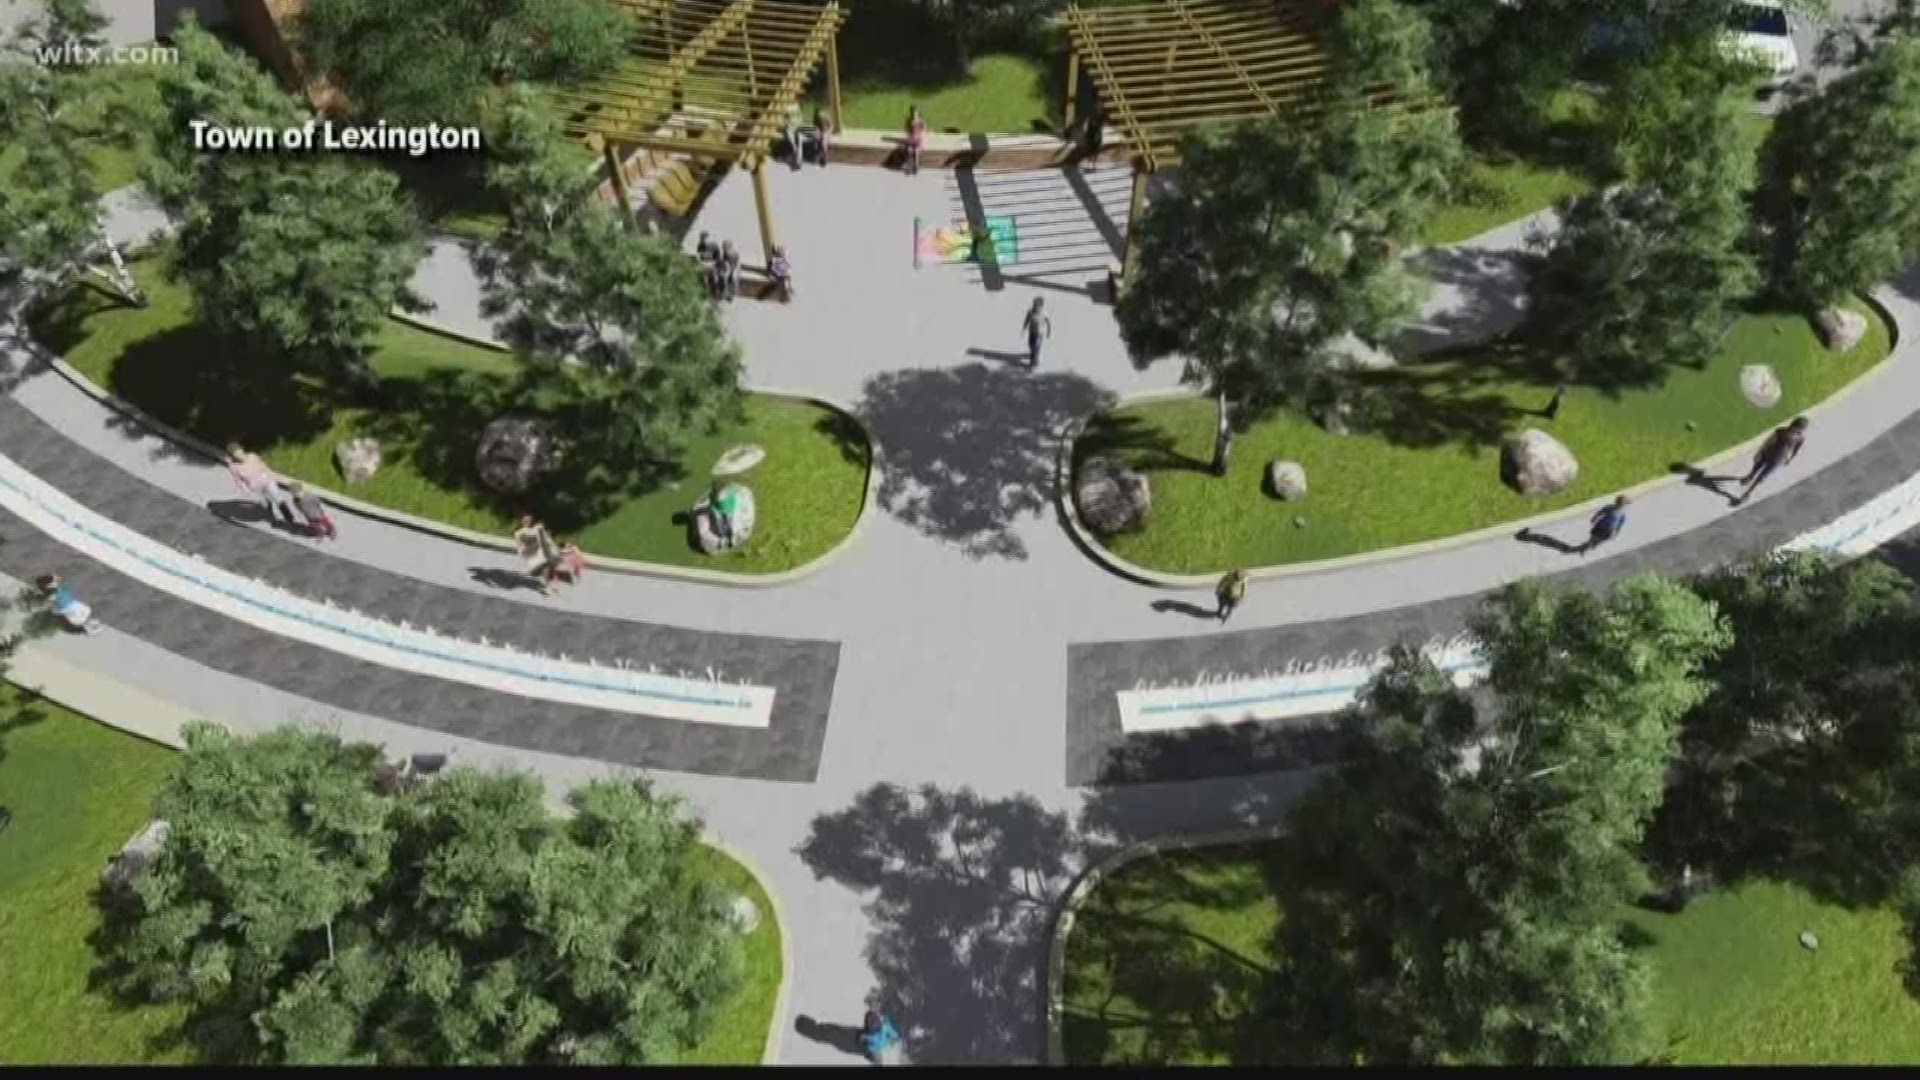 The park is expanding and will have an area for teens.